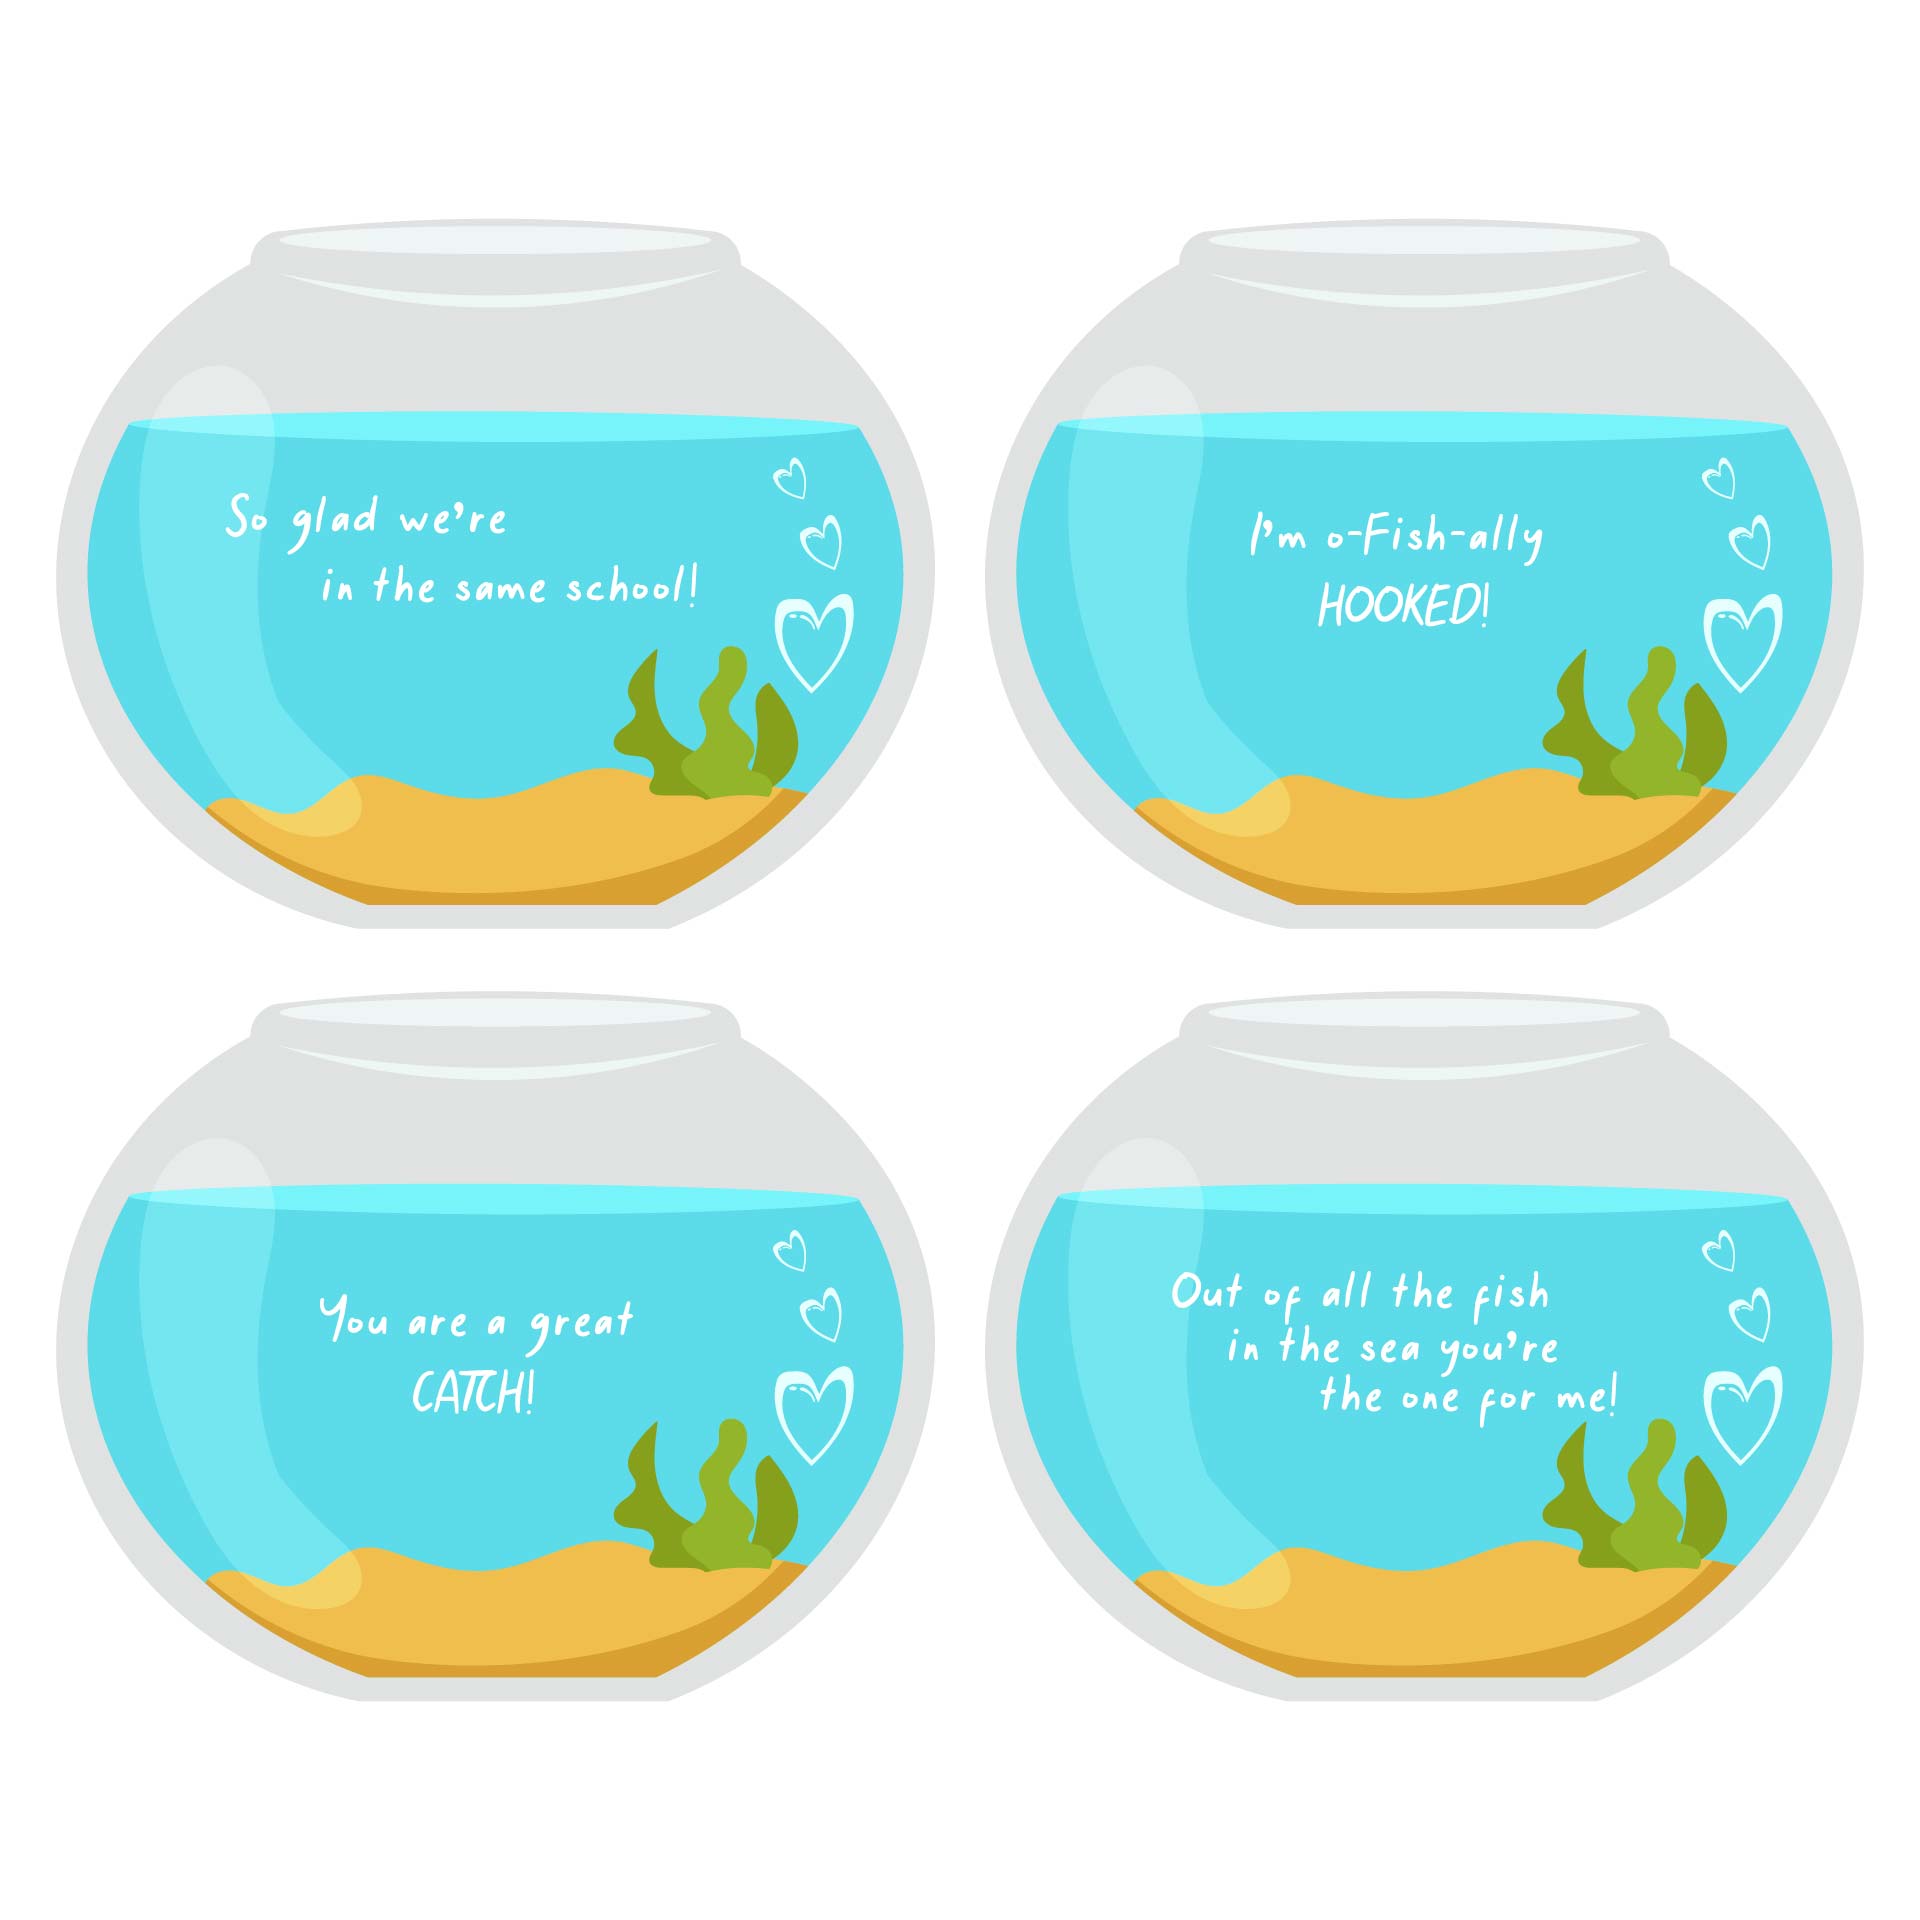 6-best-images-of-fish-bowl-template-printable-fish-bowl-template-empty-fish-bowl-coloring